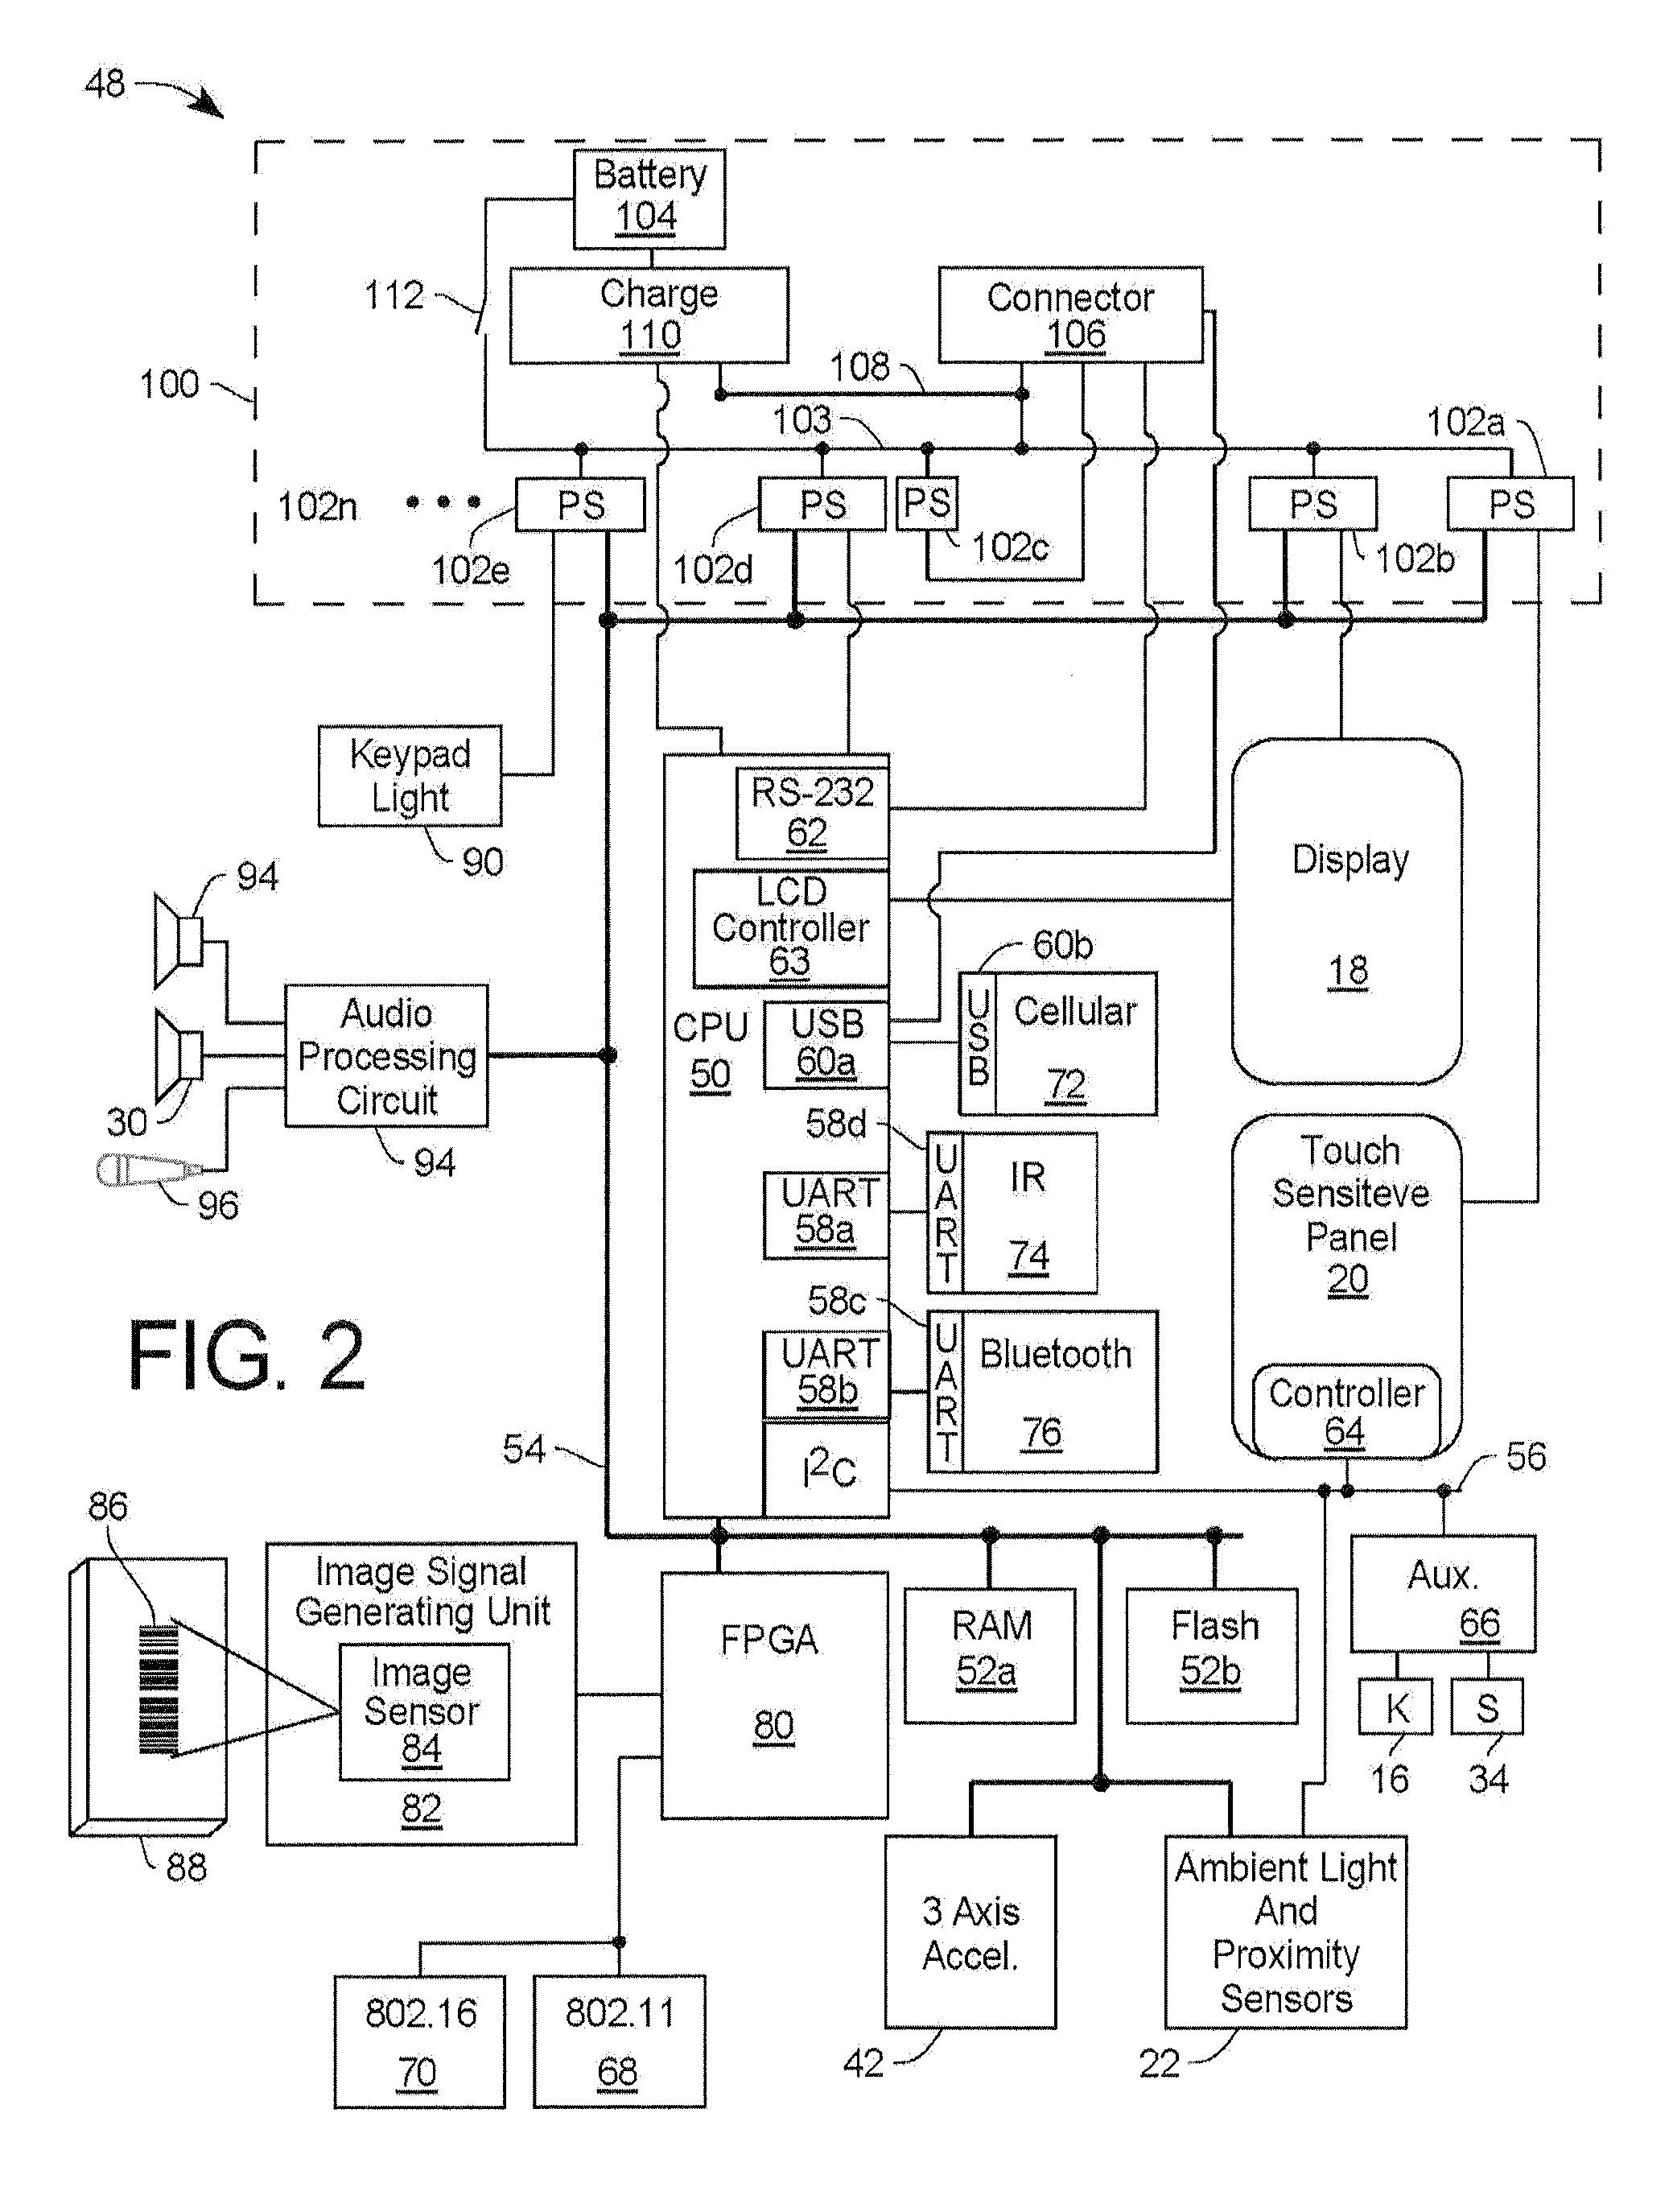 Power management scheme for portable data collection devices utilizing location and position sensors